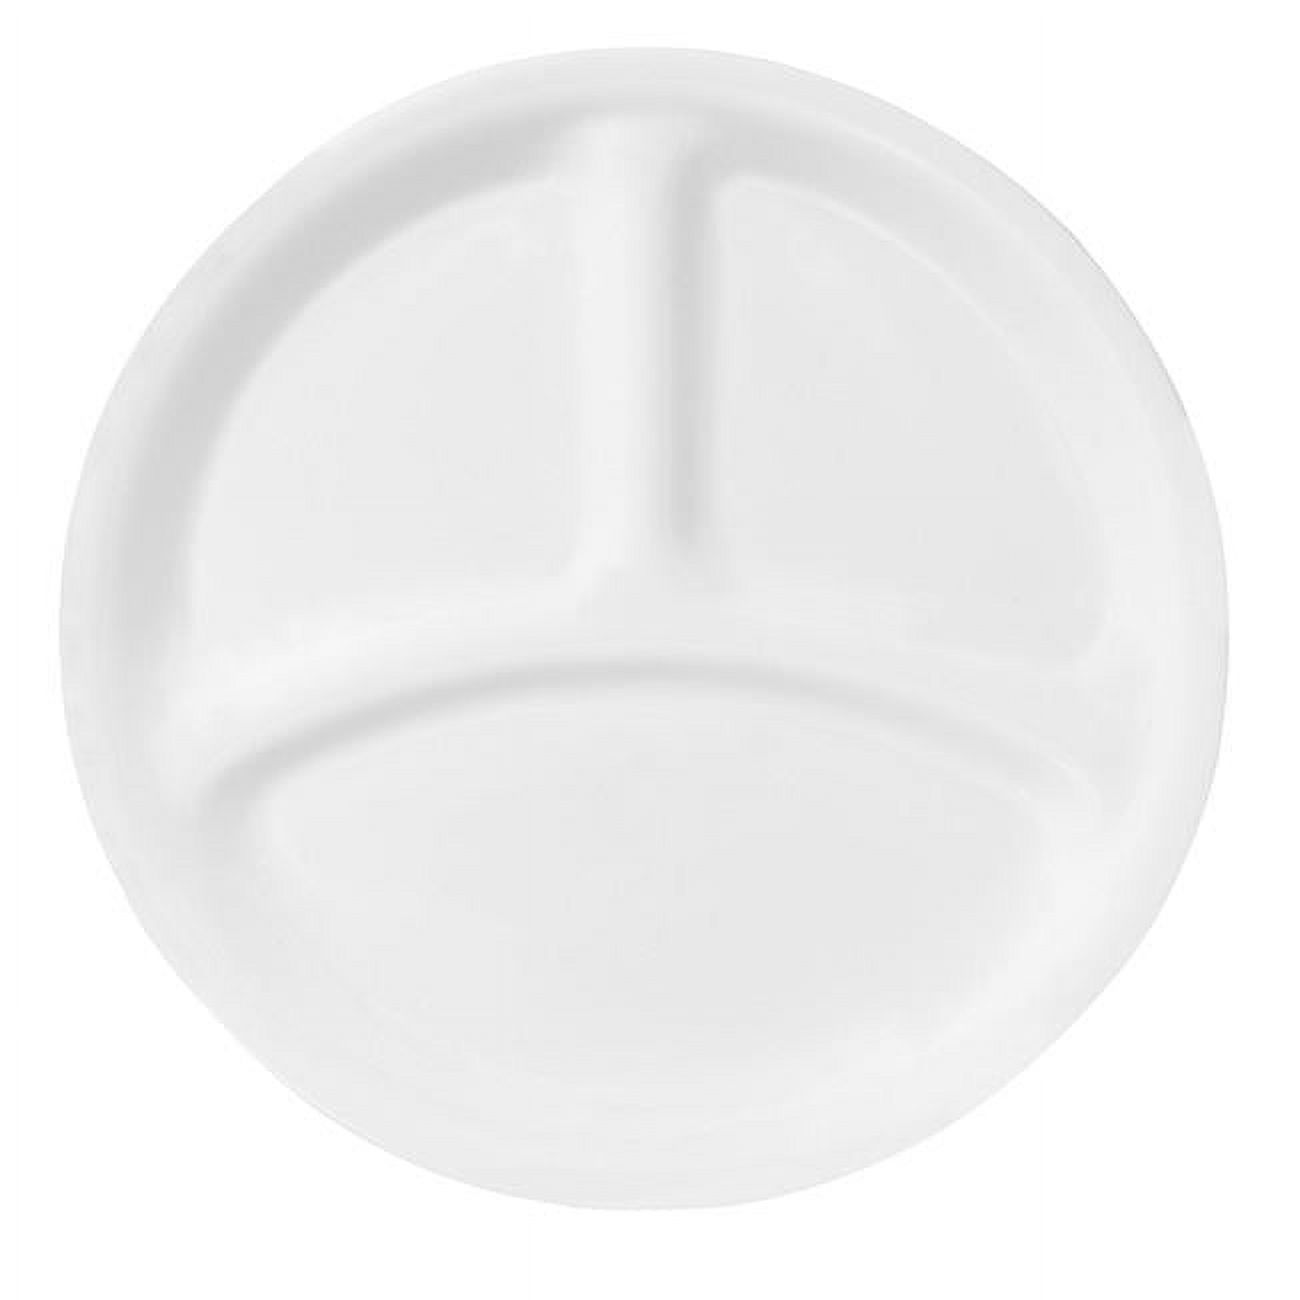 Corelle Winter Frost White, Round Divided Dinner Plate, 10.25" - image 1 of 8